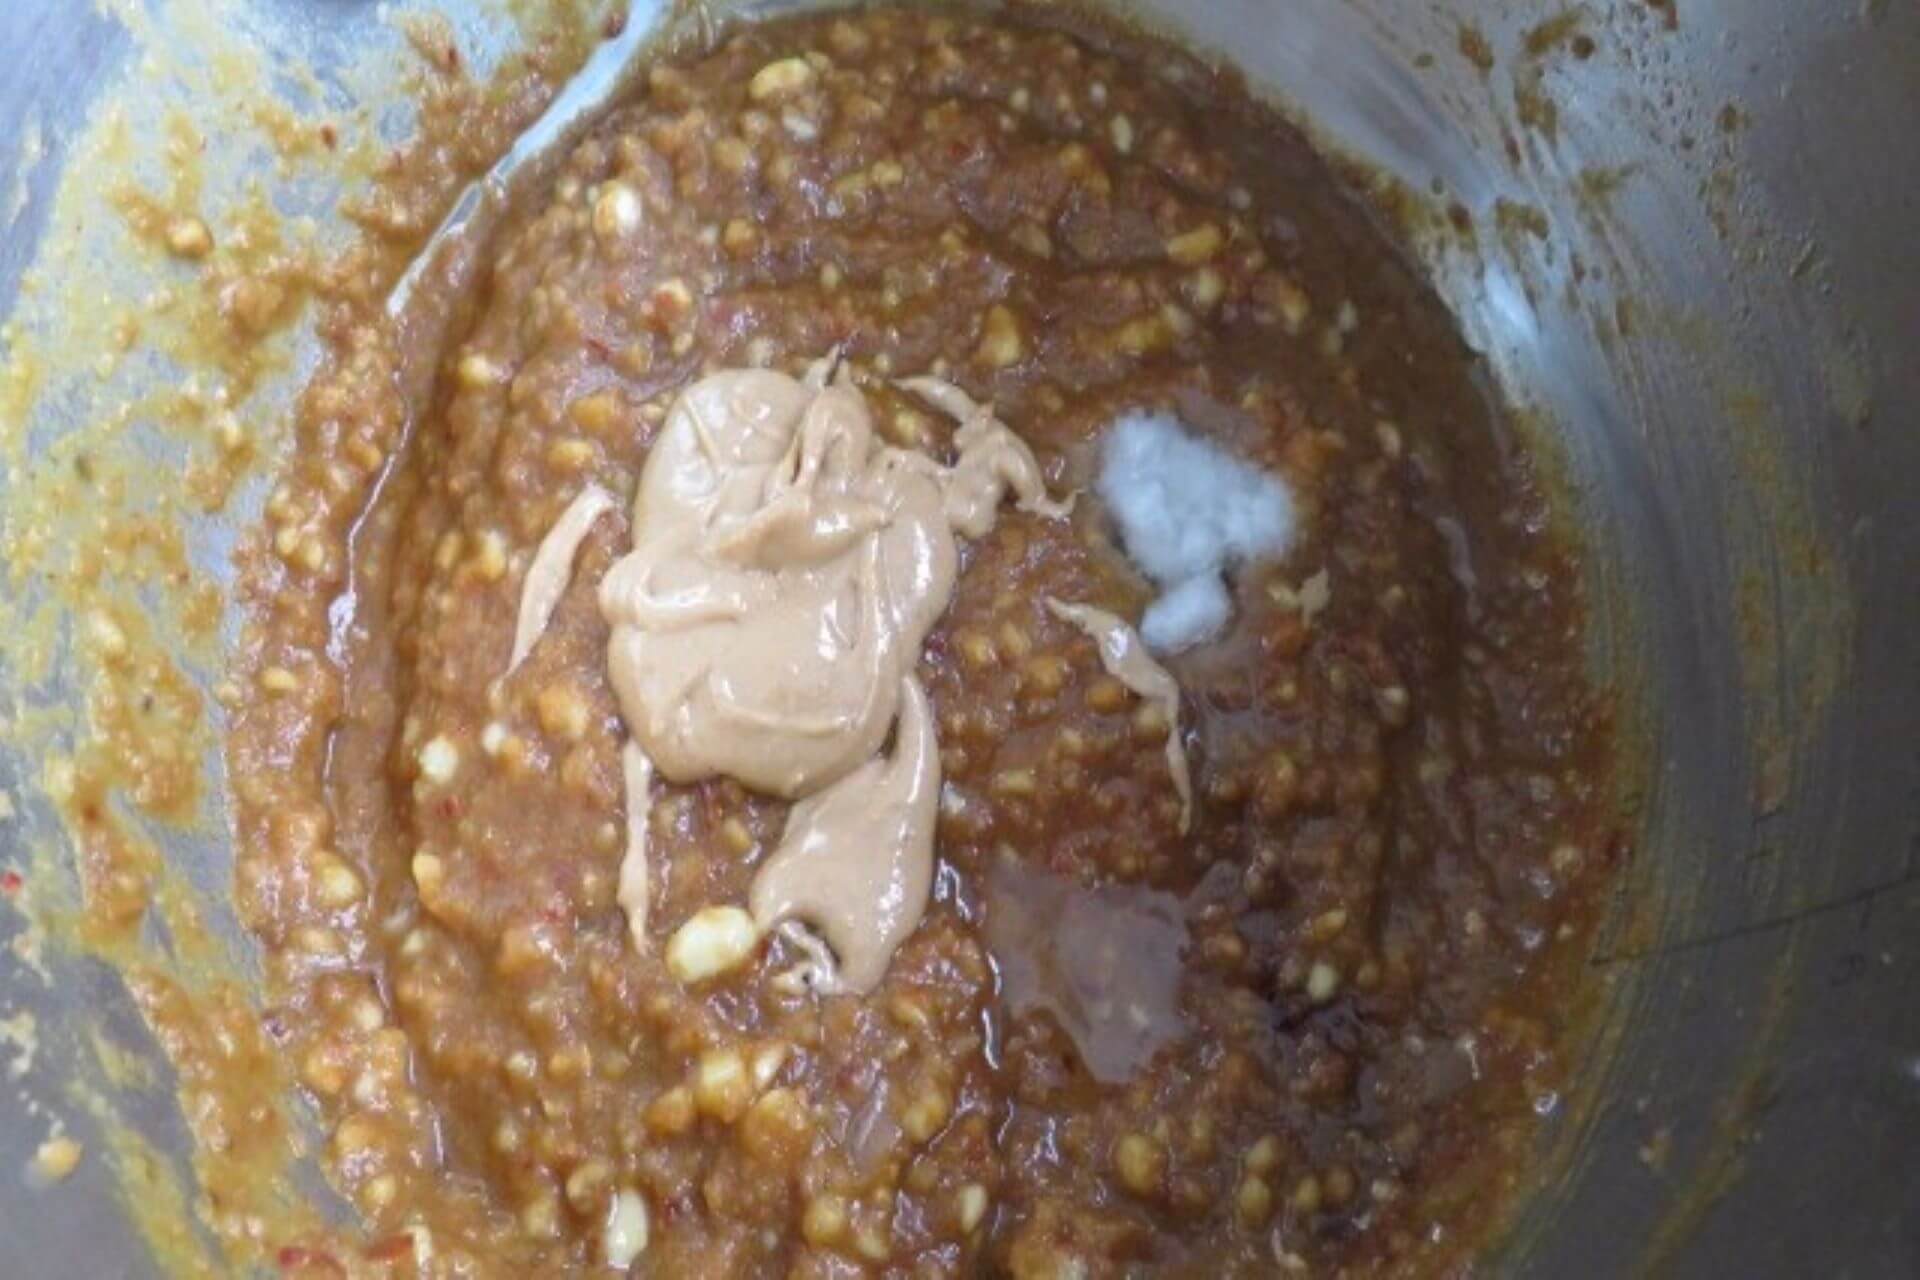 satay sauce with peanut butter and coconut oil